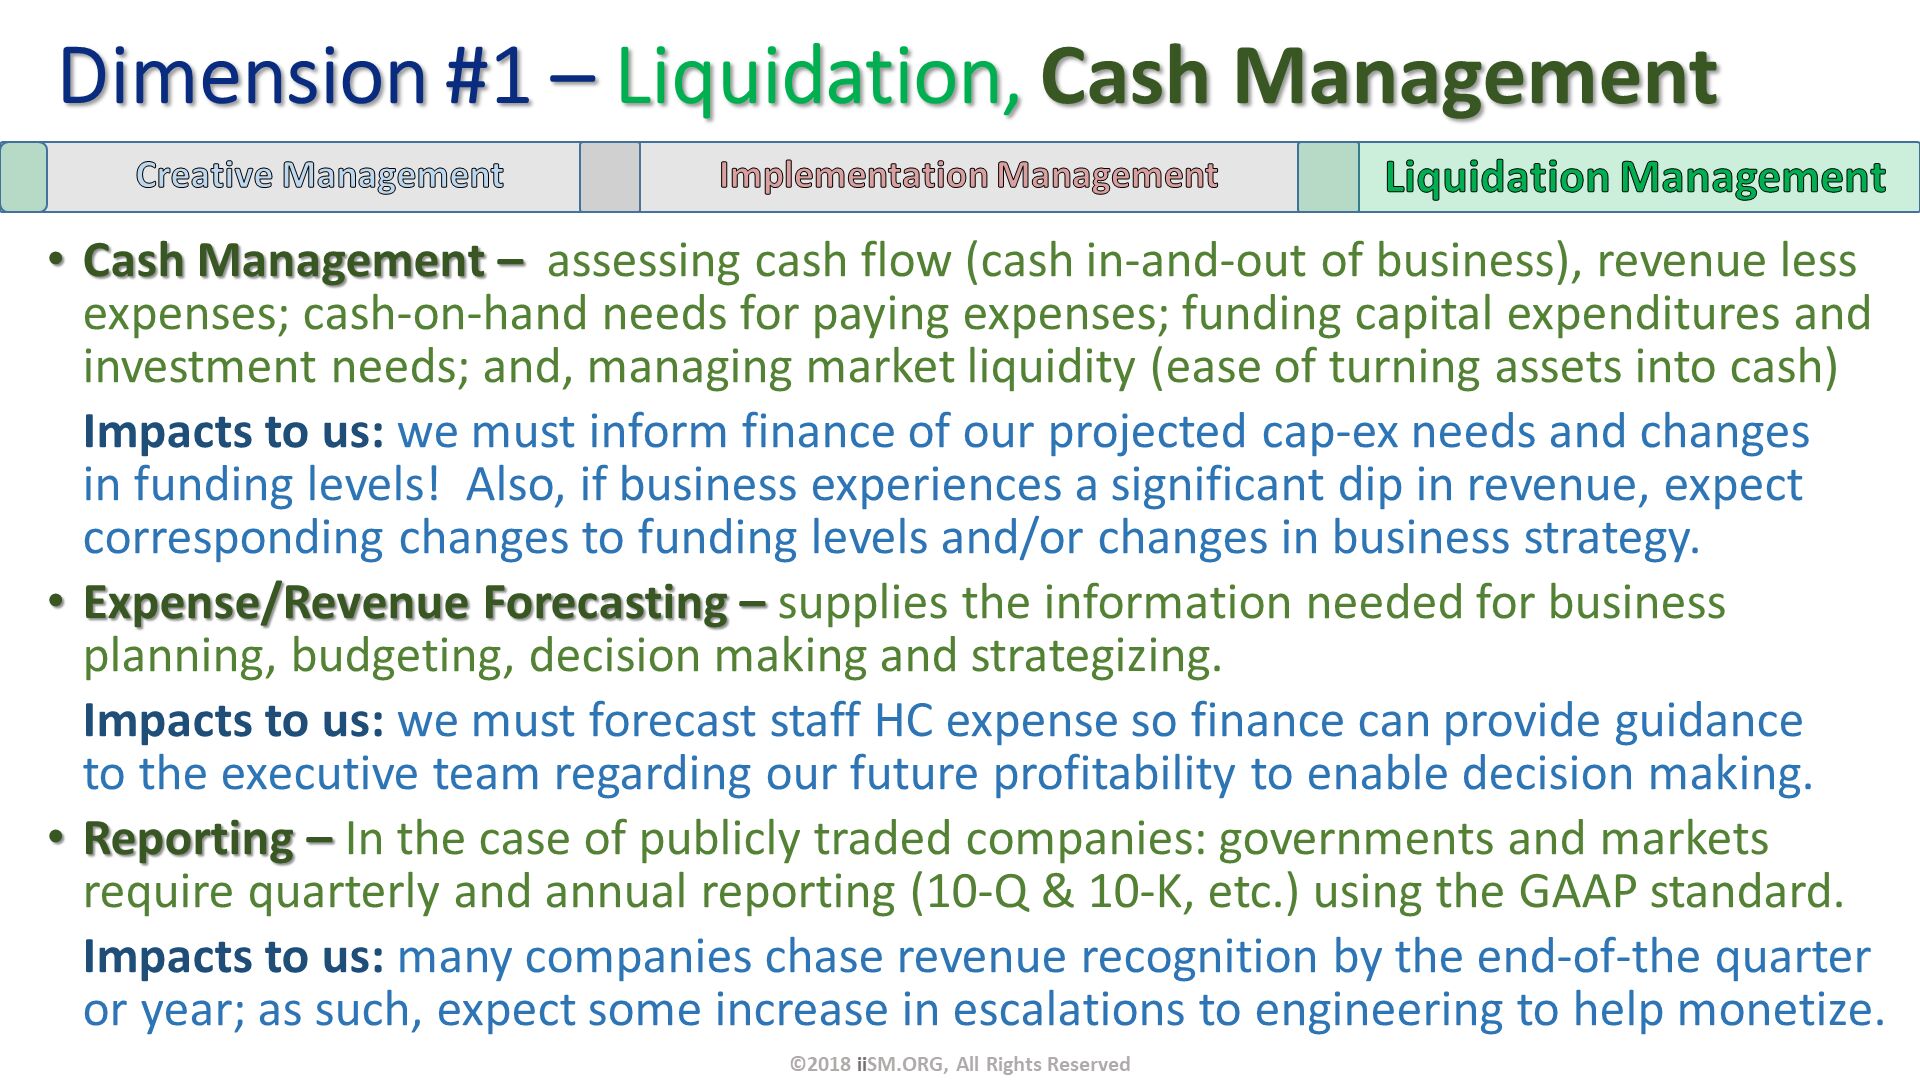 Cash Management –  assessing cash flow (cash in-and-out of business), revenue less expenses; cash-on-hand needs for paying expenses; funding capital expenditures and investment needs; and, managing market liquidity (ease of turning assets into cash)
Impacts to us: we must inform finance of our projected cap-ex needs and changes in funding levels!  Also, if business experiences a significant dip in revenue, expect corresponding changes to funding levels and/or changes in business strategy.
Expense/Revenue Forecasting – supplies the information needed for business planning, budgeting, decision making and strategizing.
Impacts to us: we must forecast staff HC expense so finance can provide guidance to the executive team regarding our future profitability to enable decision making.
Reporting – In the case of publicly traded companies: governments and markets require quarterly and annual reporting (10-Q & 10-K, etc.) using the GAAP standard.
Impacts to us: many companies chase revenue recognition by the end-of-the quarter or year; as such, expect some increase in escalations to engineering to help monetize. Dimension #1 – Liquidation, Cash Management. ©2018 iiSM.ORG, All Rights Reserved. 